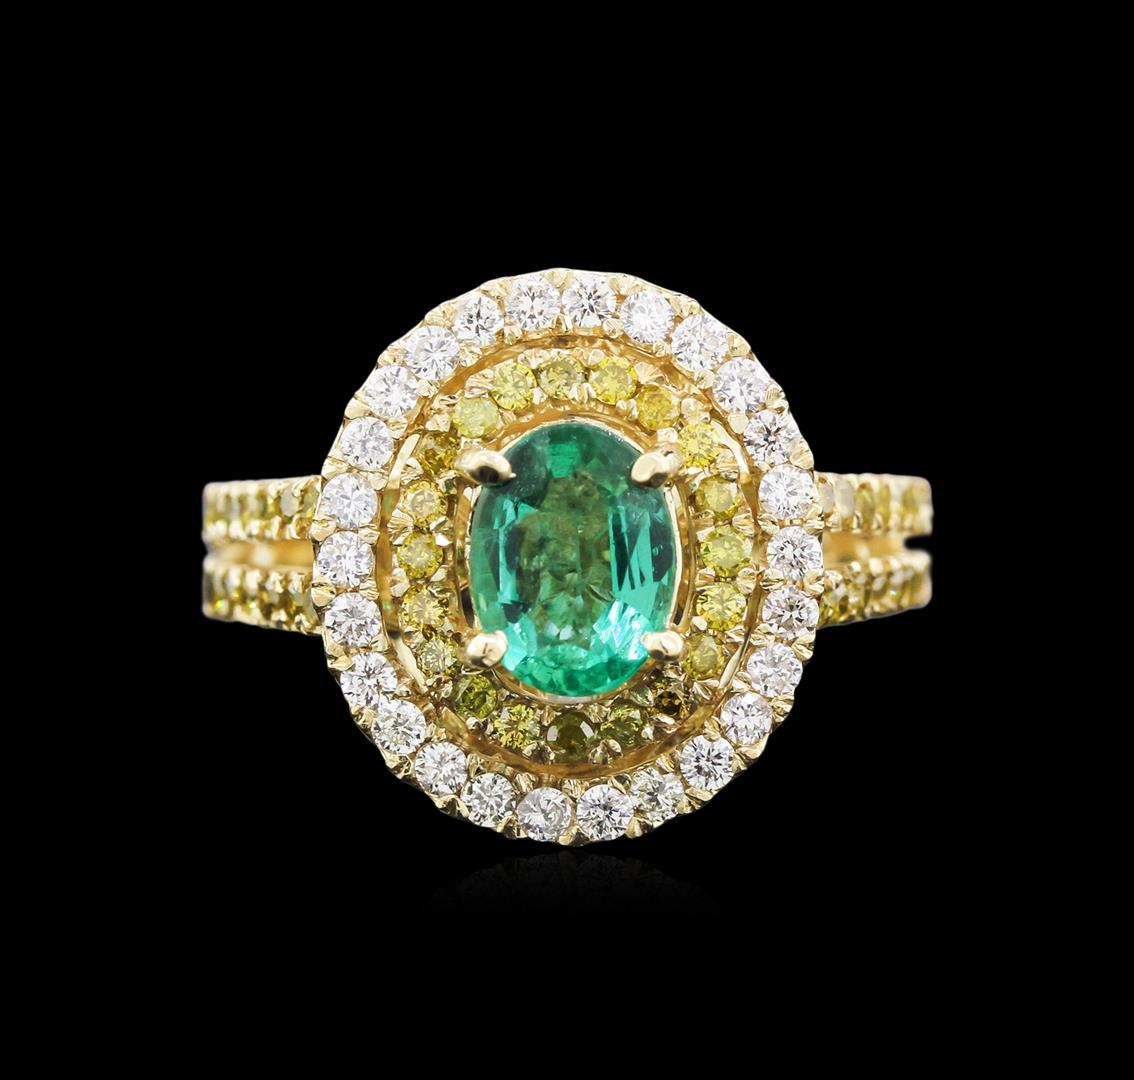 0.88 ctw Emerald and Diamond Ring - 14KT Yellow Gold